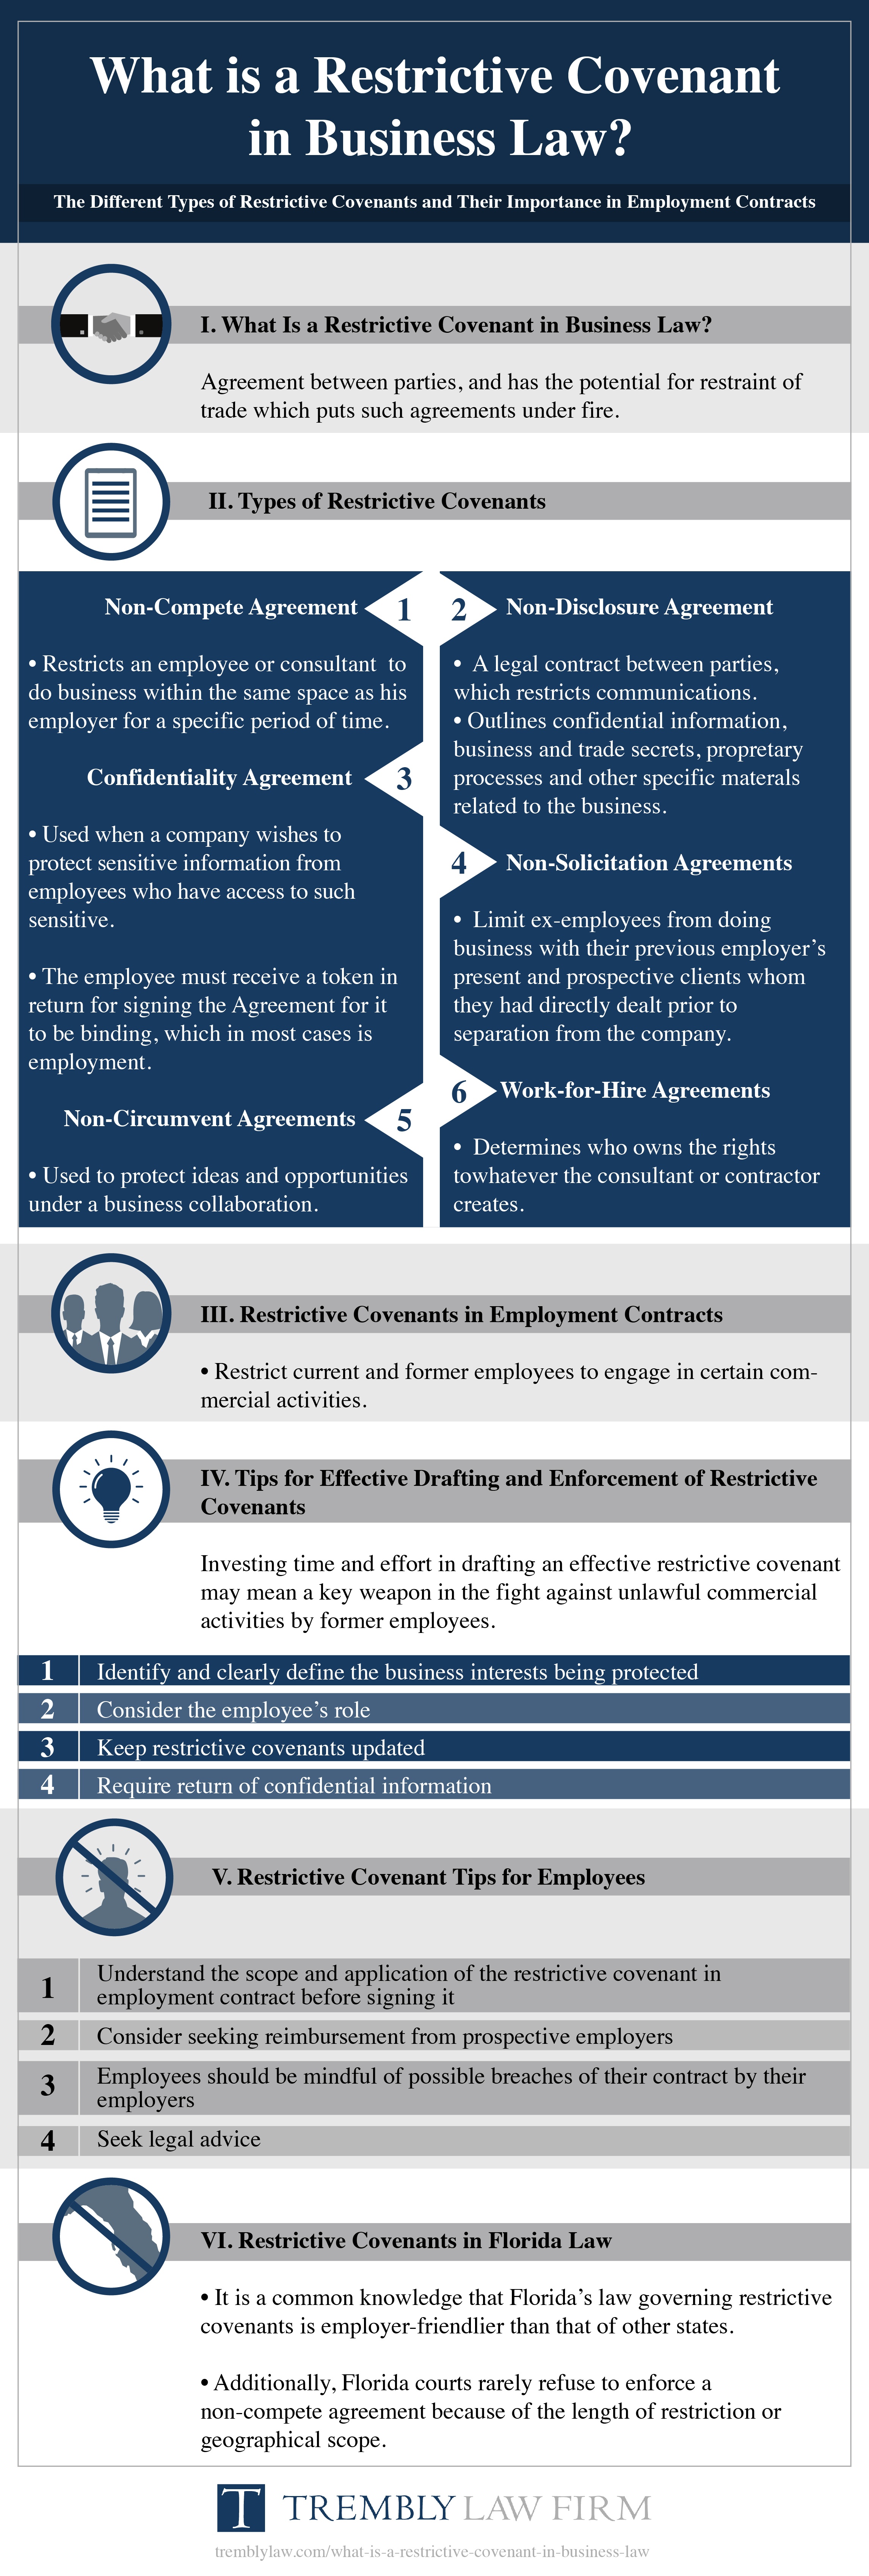 what is a restrictive covenant in business law 01 1